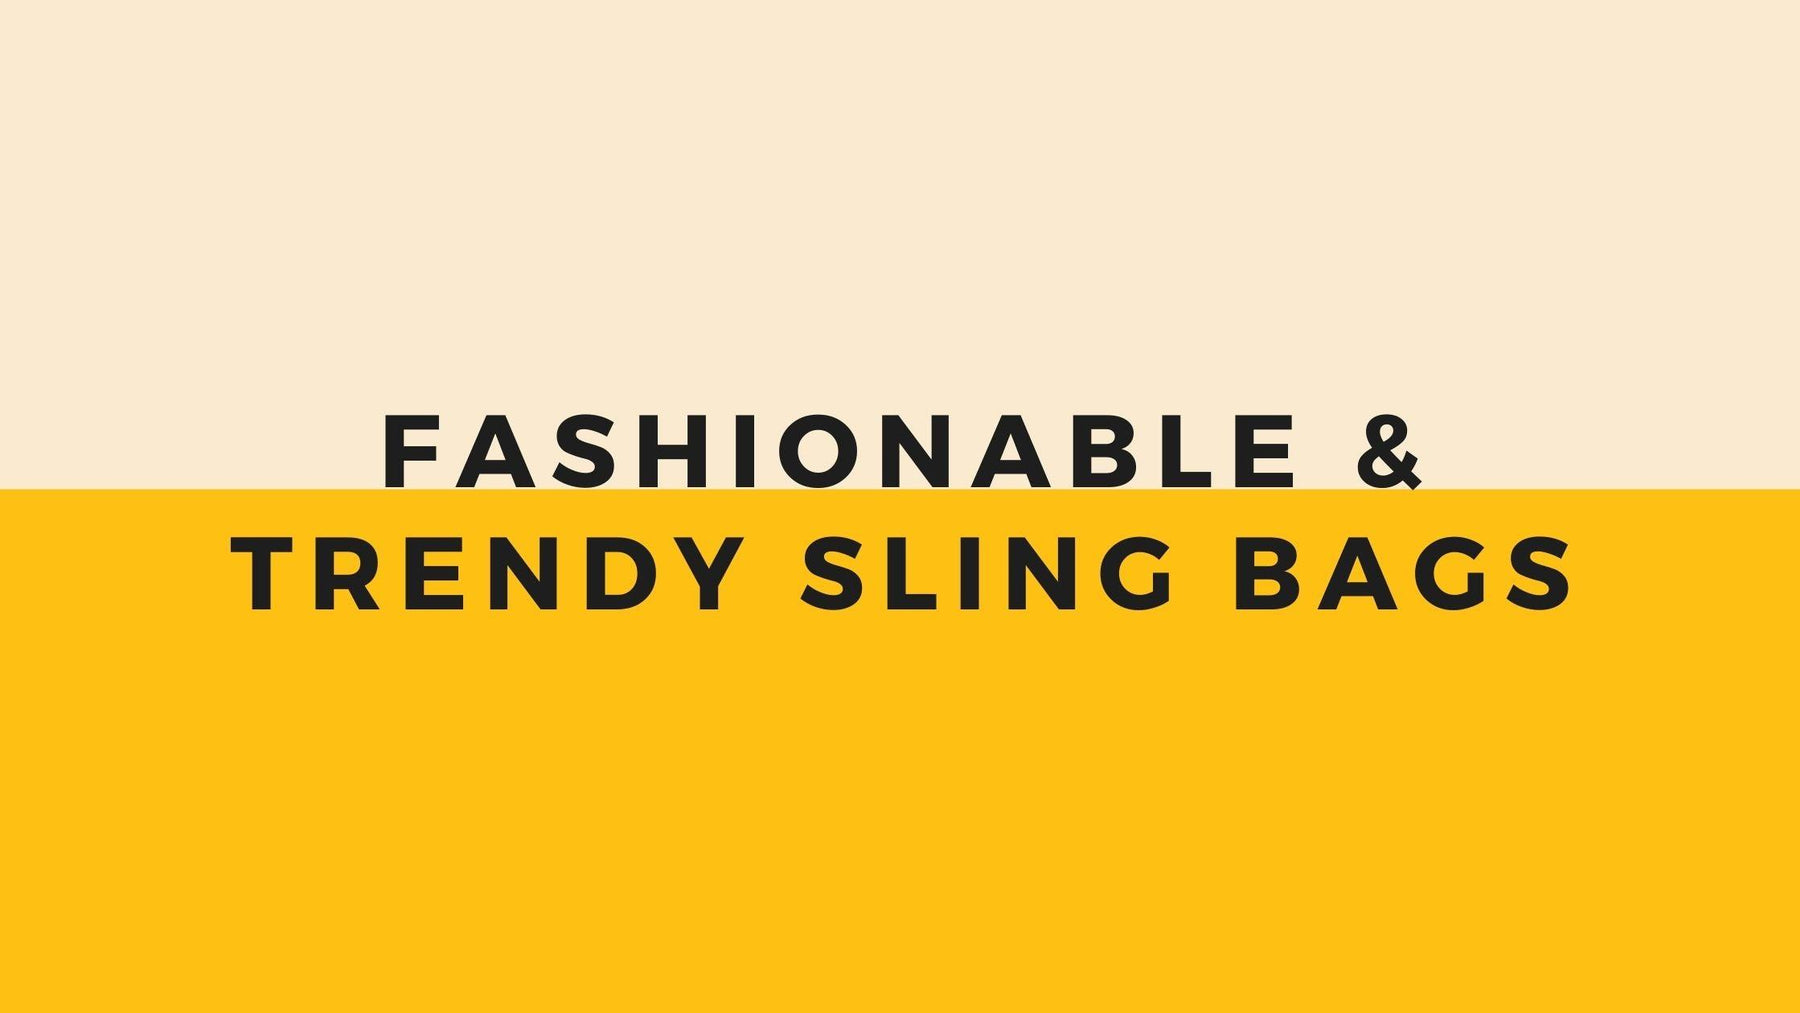 Fashionable & Trendy Sling Bags - WoodenTwist